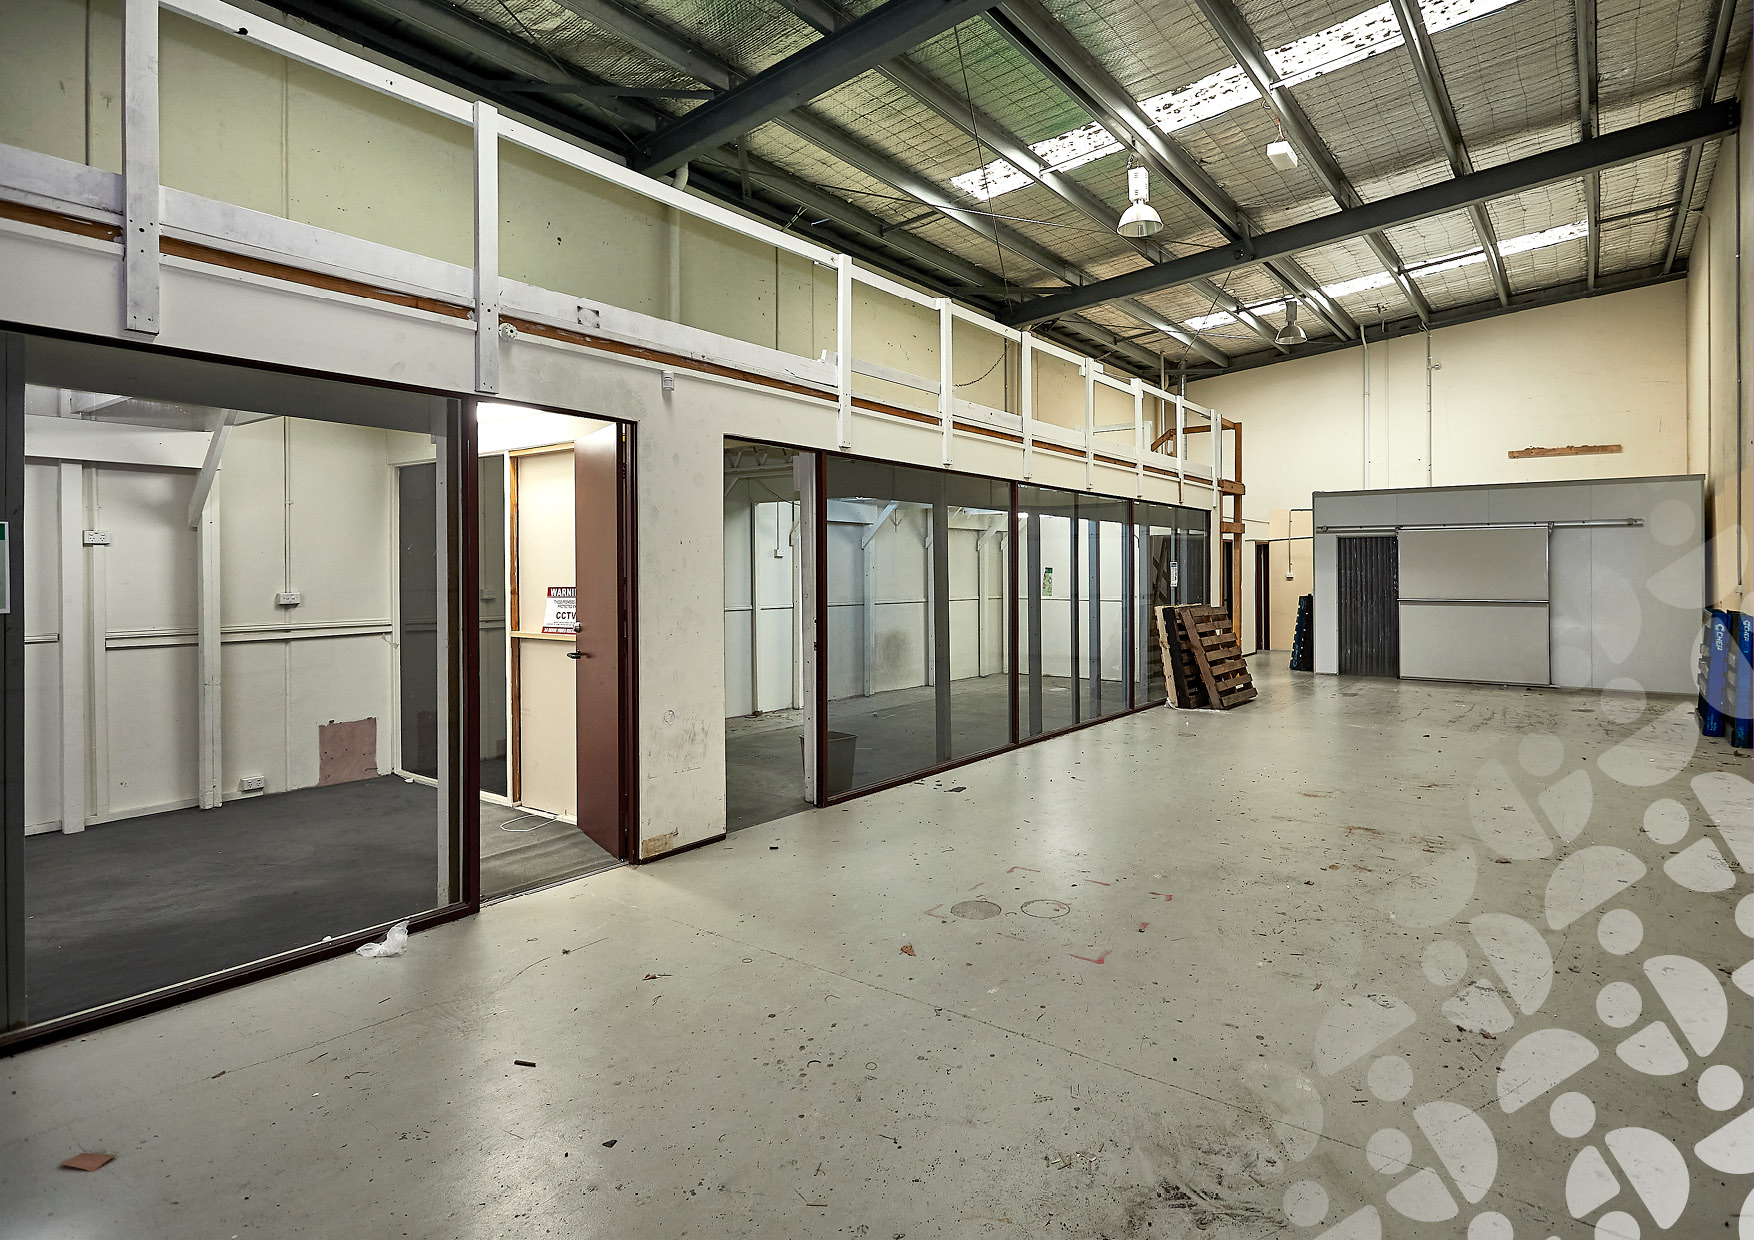 Sold Cecil Collective Part 1 150 Cecil Street Fitzroy Warehouse Commercial Real Estate